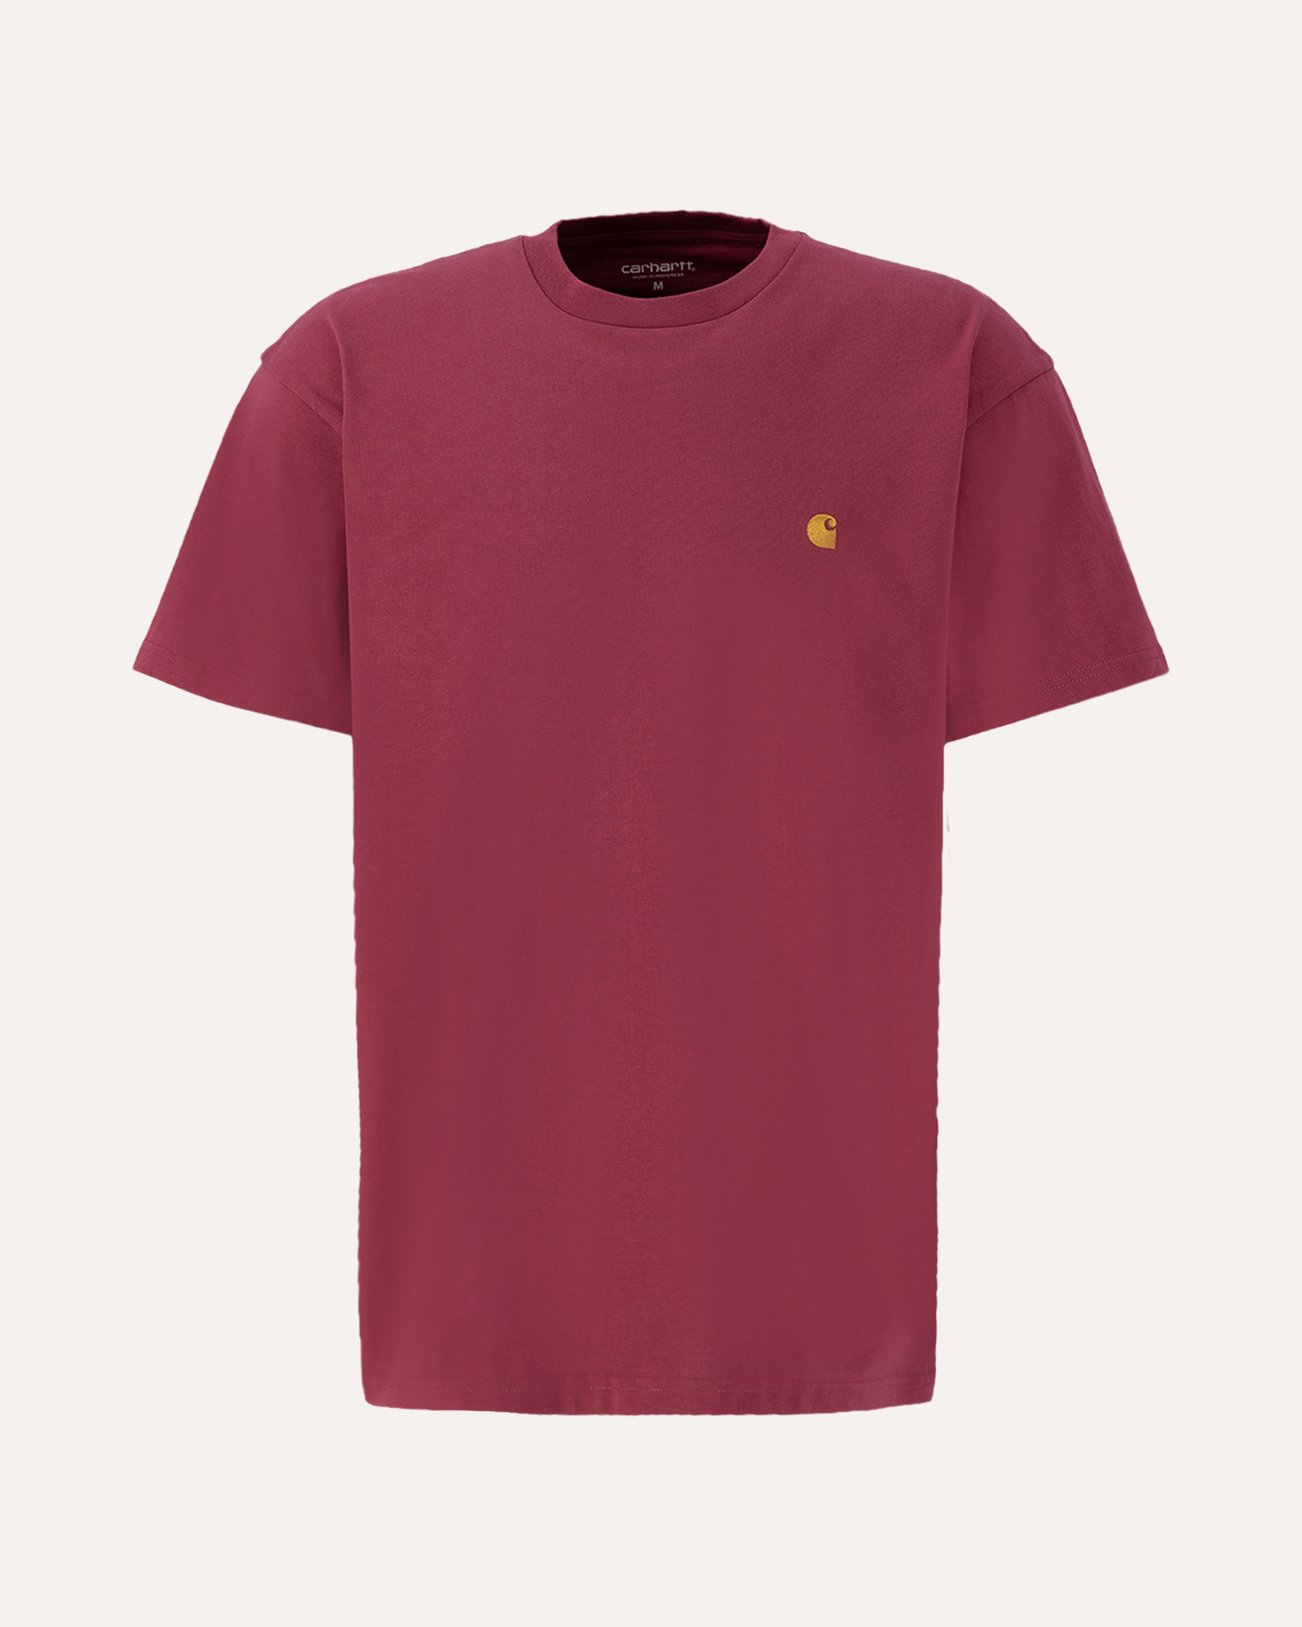 Carhartt WIP S/S Chase T-Shirt ROOD 1